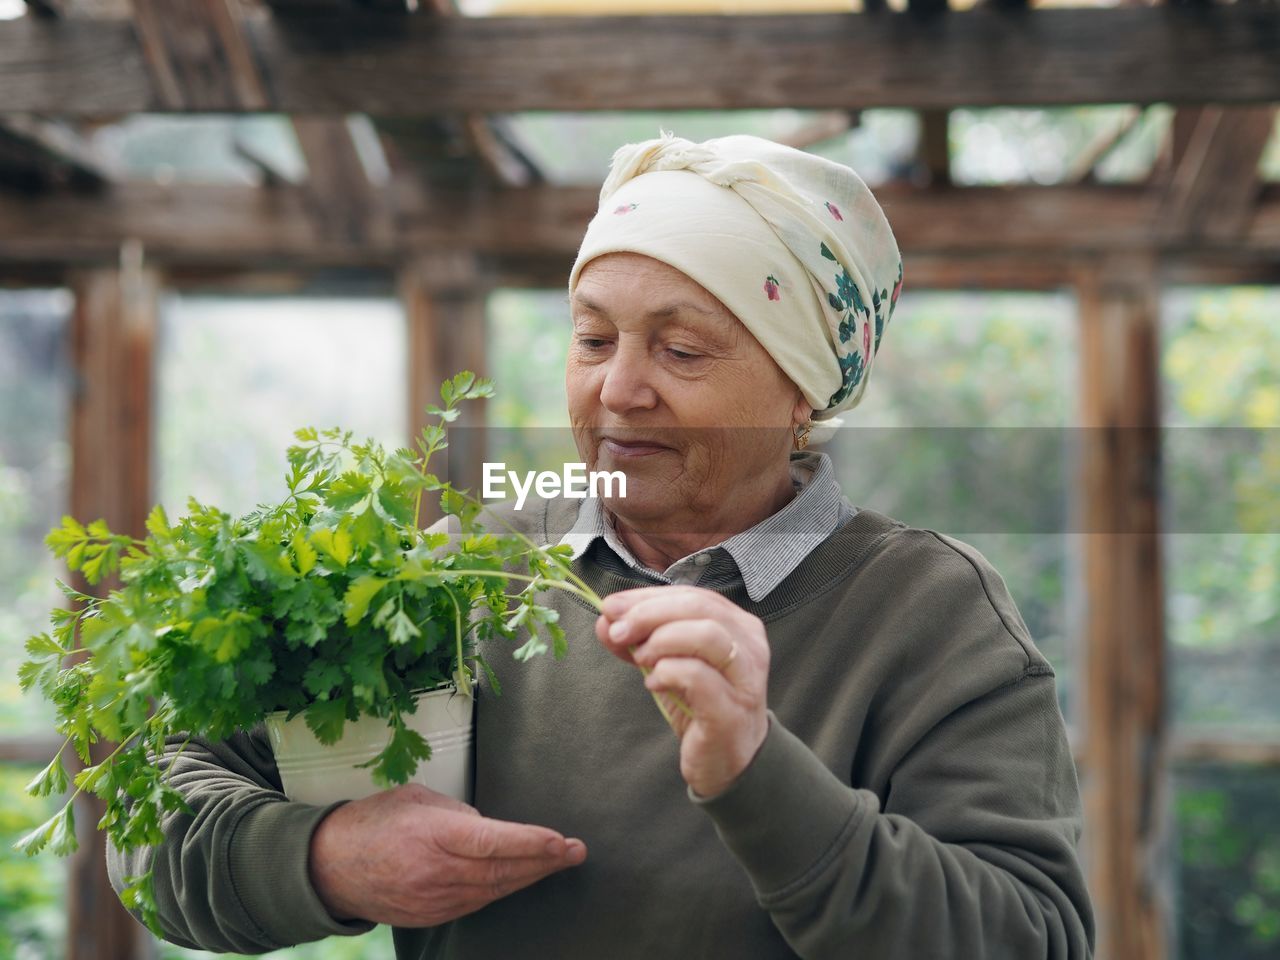 An elderly woman in a rustic headscarf holds a bunch of early healthy cilantro herb grown 